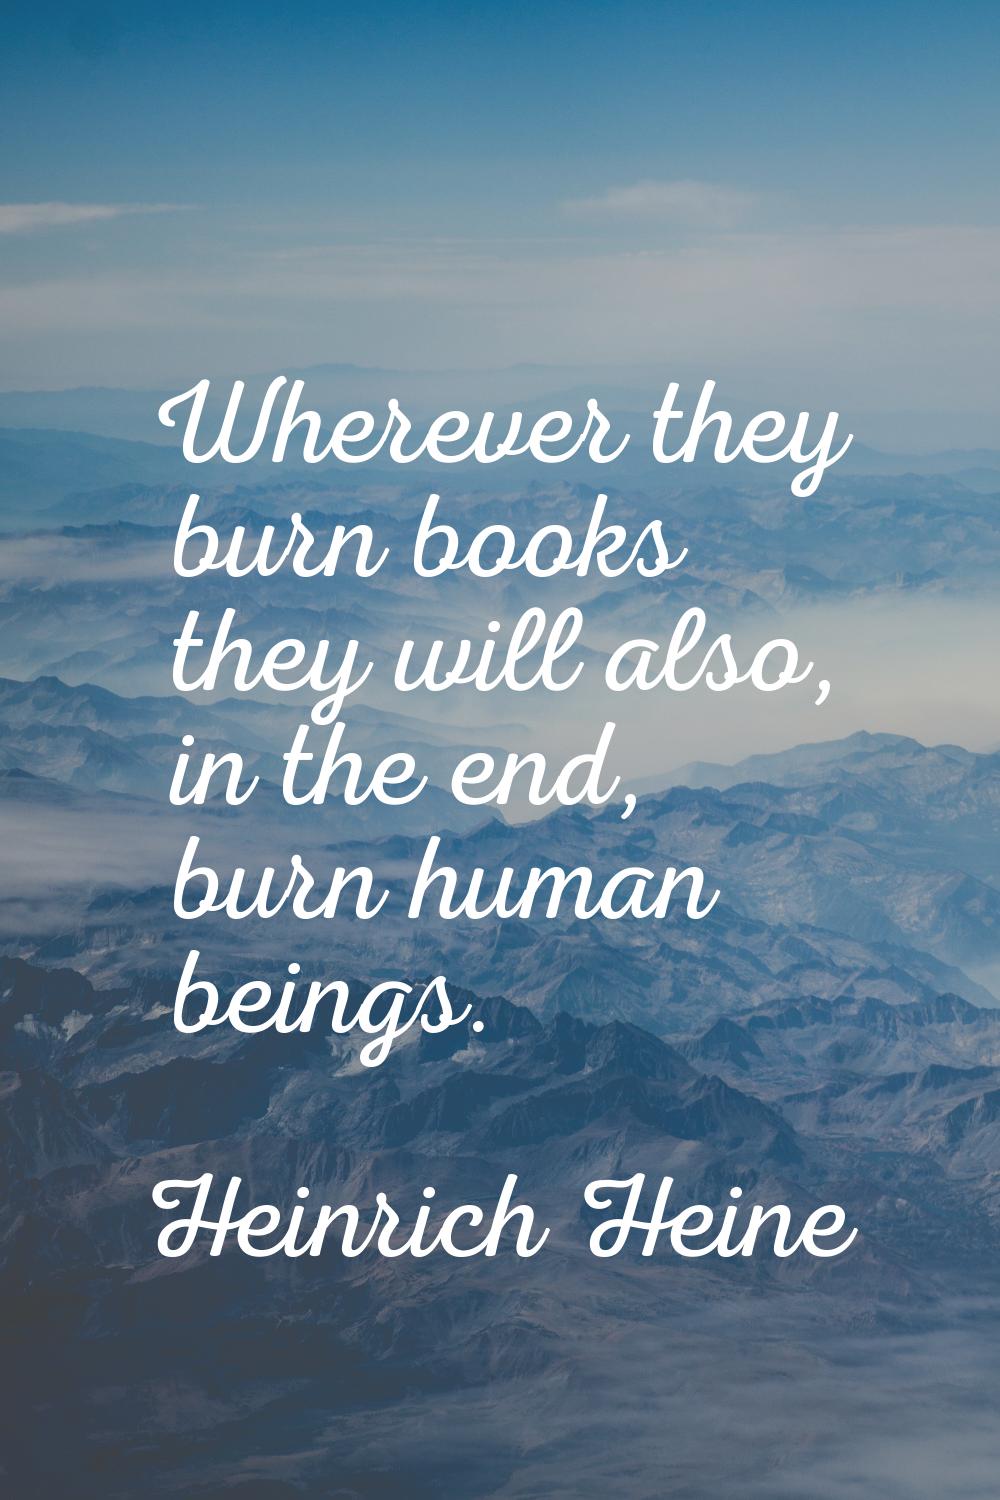 Wherever they burn books they will also, in the end, burn human beings.